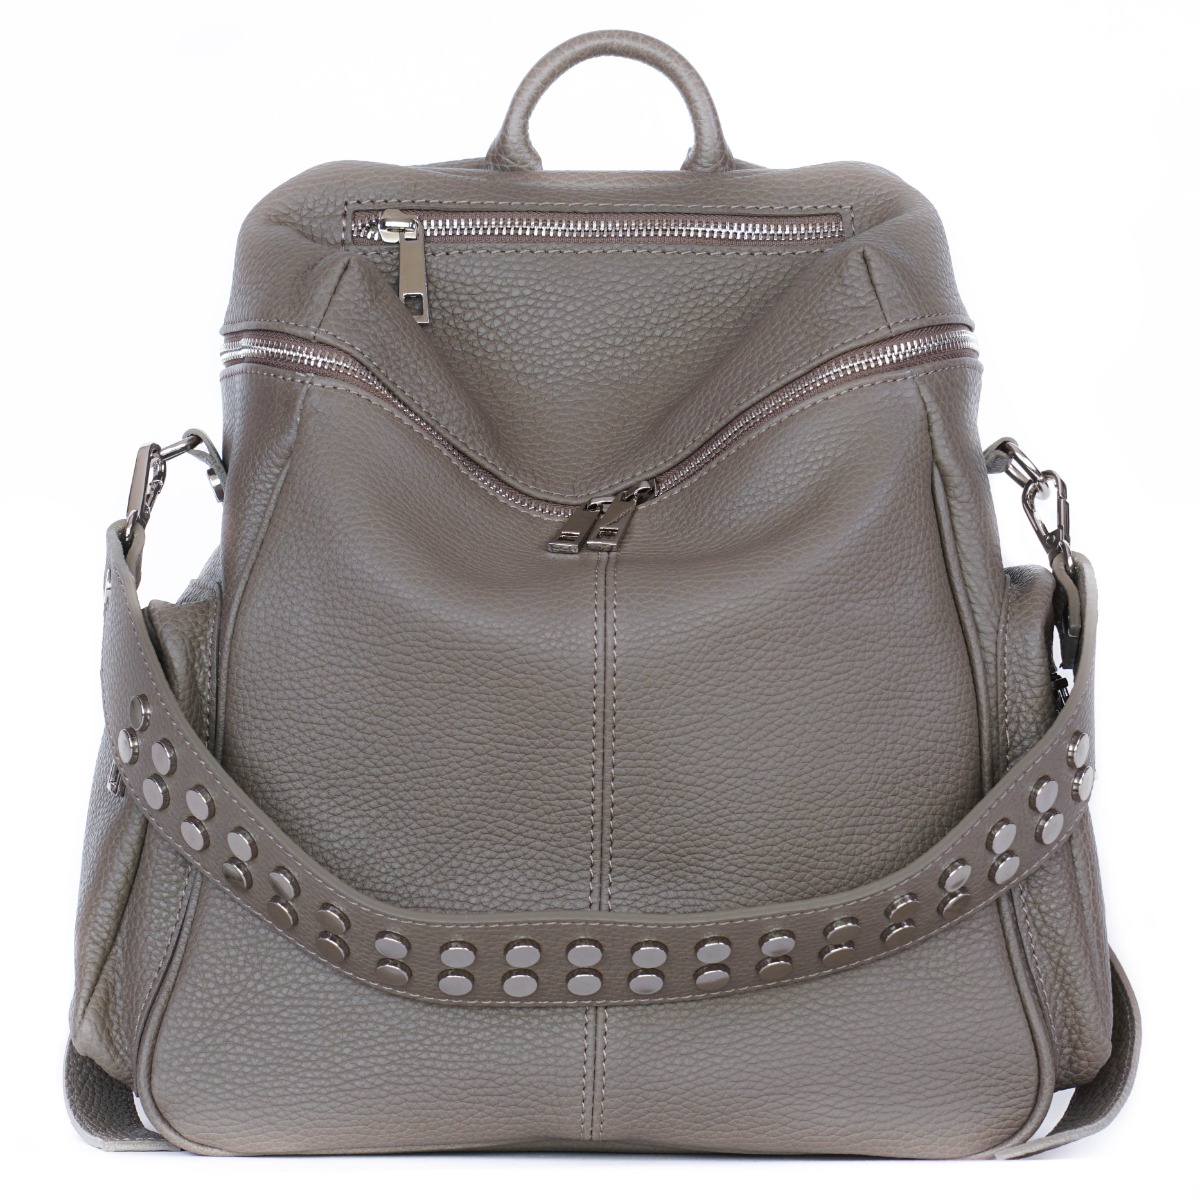 Soft genuine leather taupe backpack bag